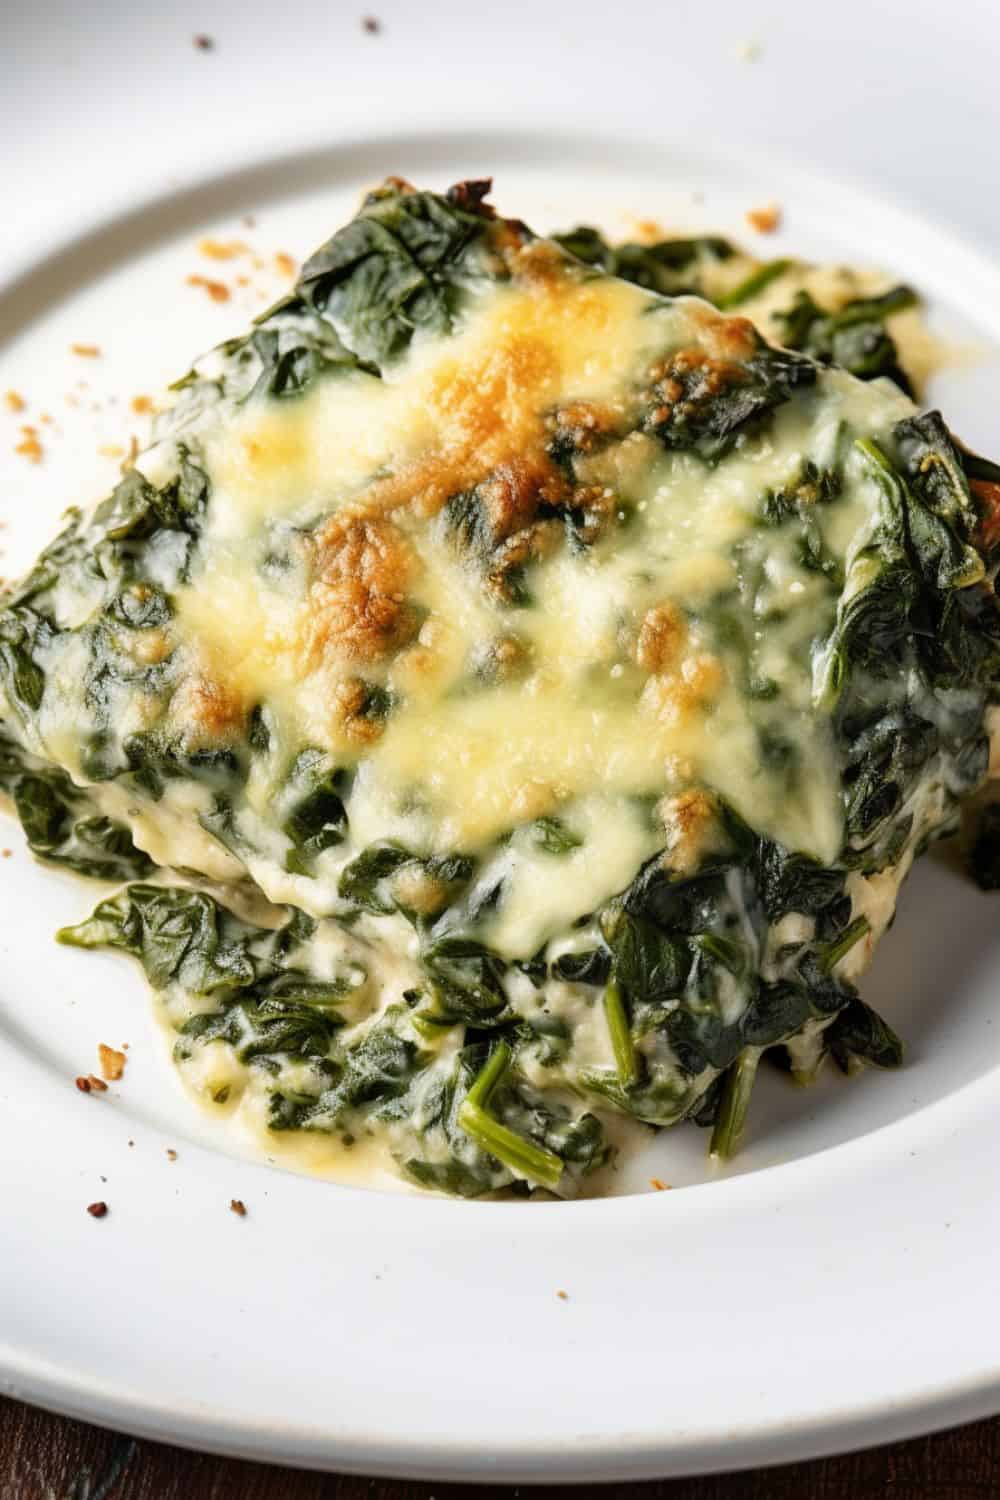 Individual serving of Spinach Gratin on a plate, garnished with a sprinkle of parsley, ready to be served at a family gathering.